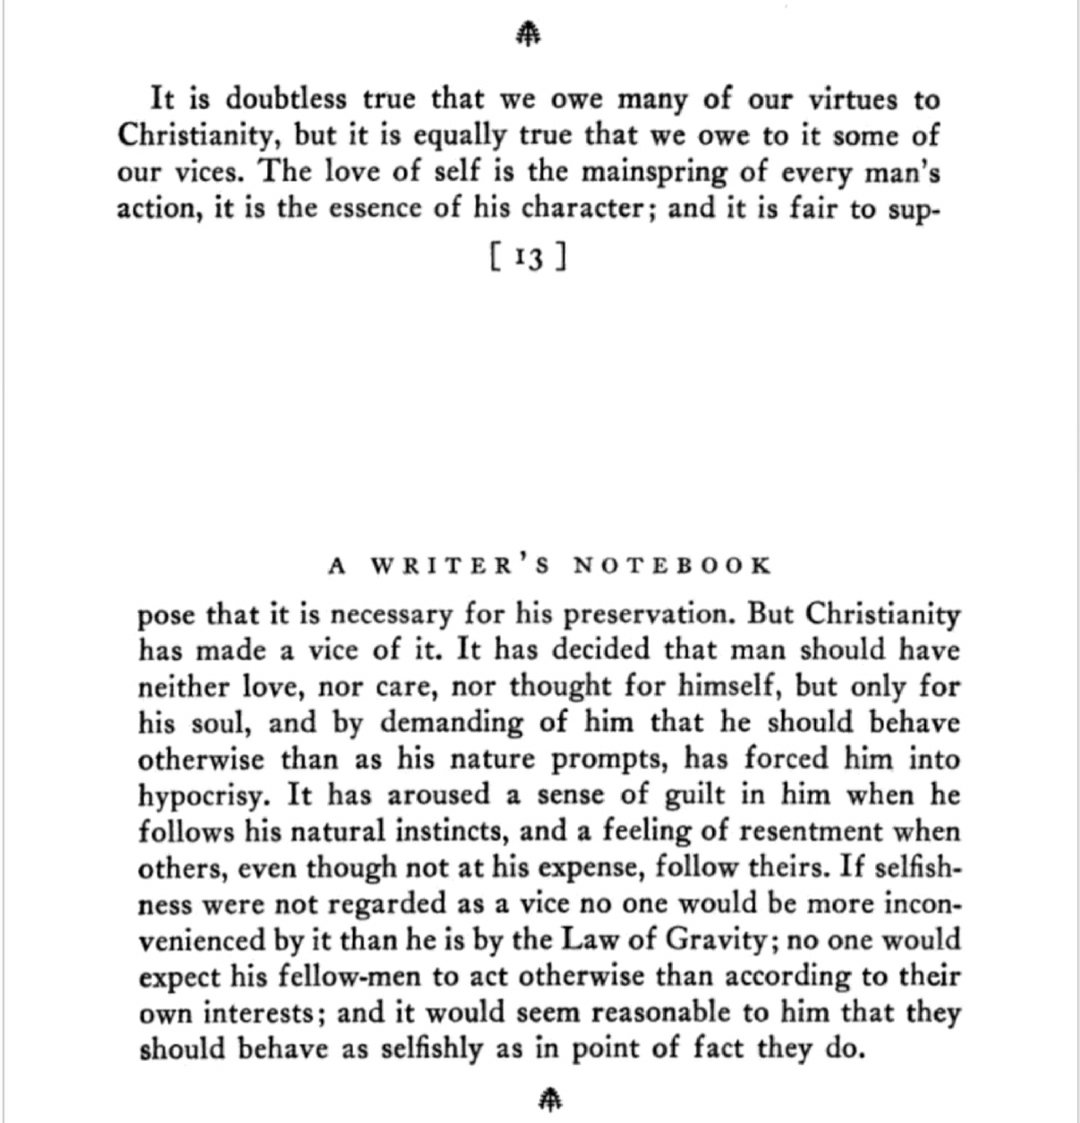 Maugham on Christianity and humanity